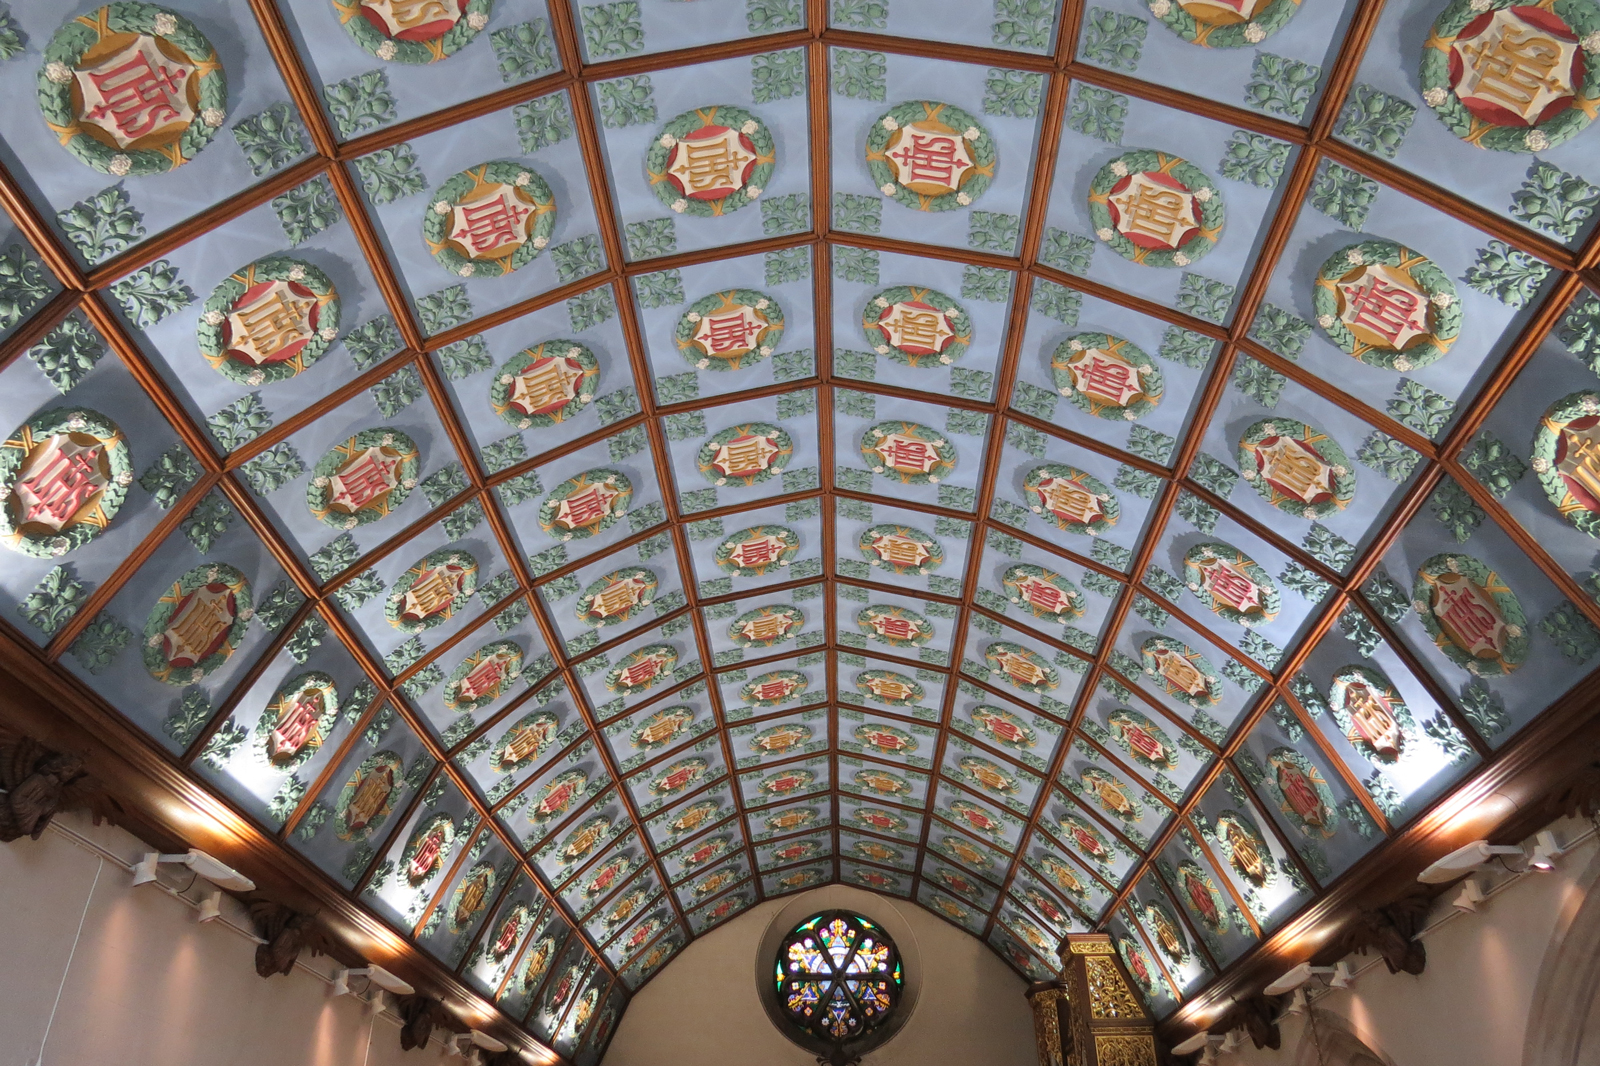 St. Mary's Church Ceiling, Petworth